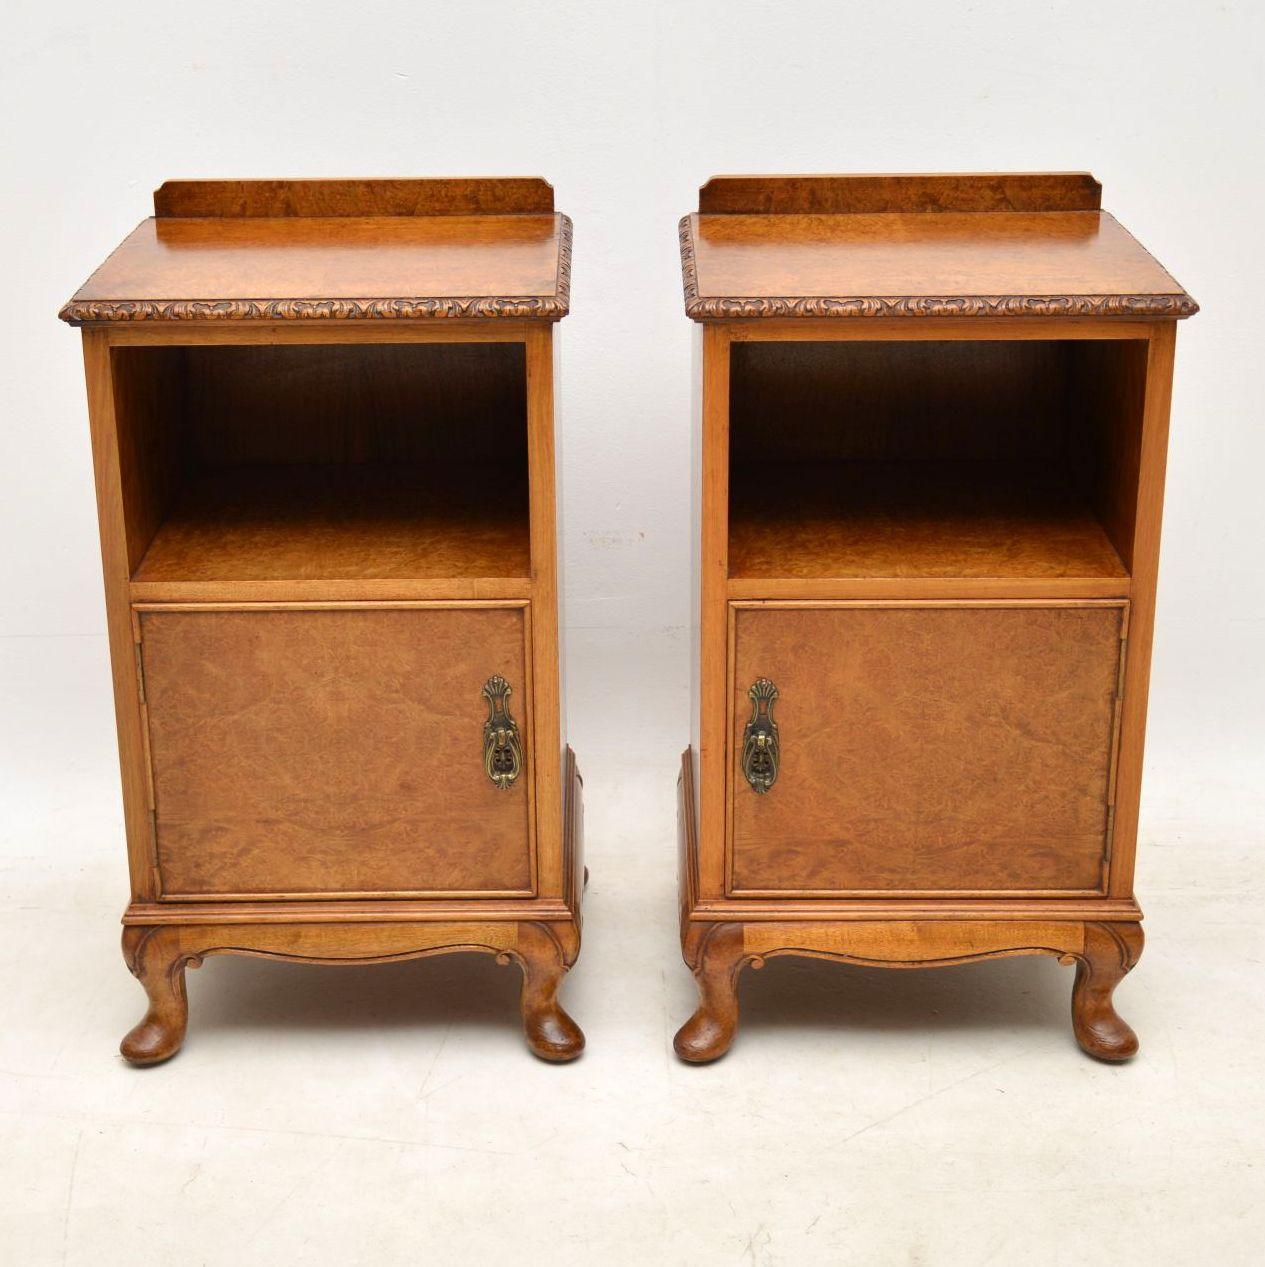 Pair of antique burr walnut bedside cabinets with really good figuring in the wood and in excellent condition. They are well constructed and are very practicable for bedsides. The tops are well carves as are the solid walnut legs. I would date these